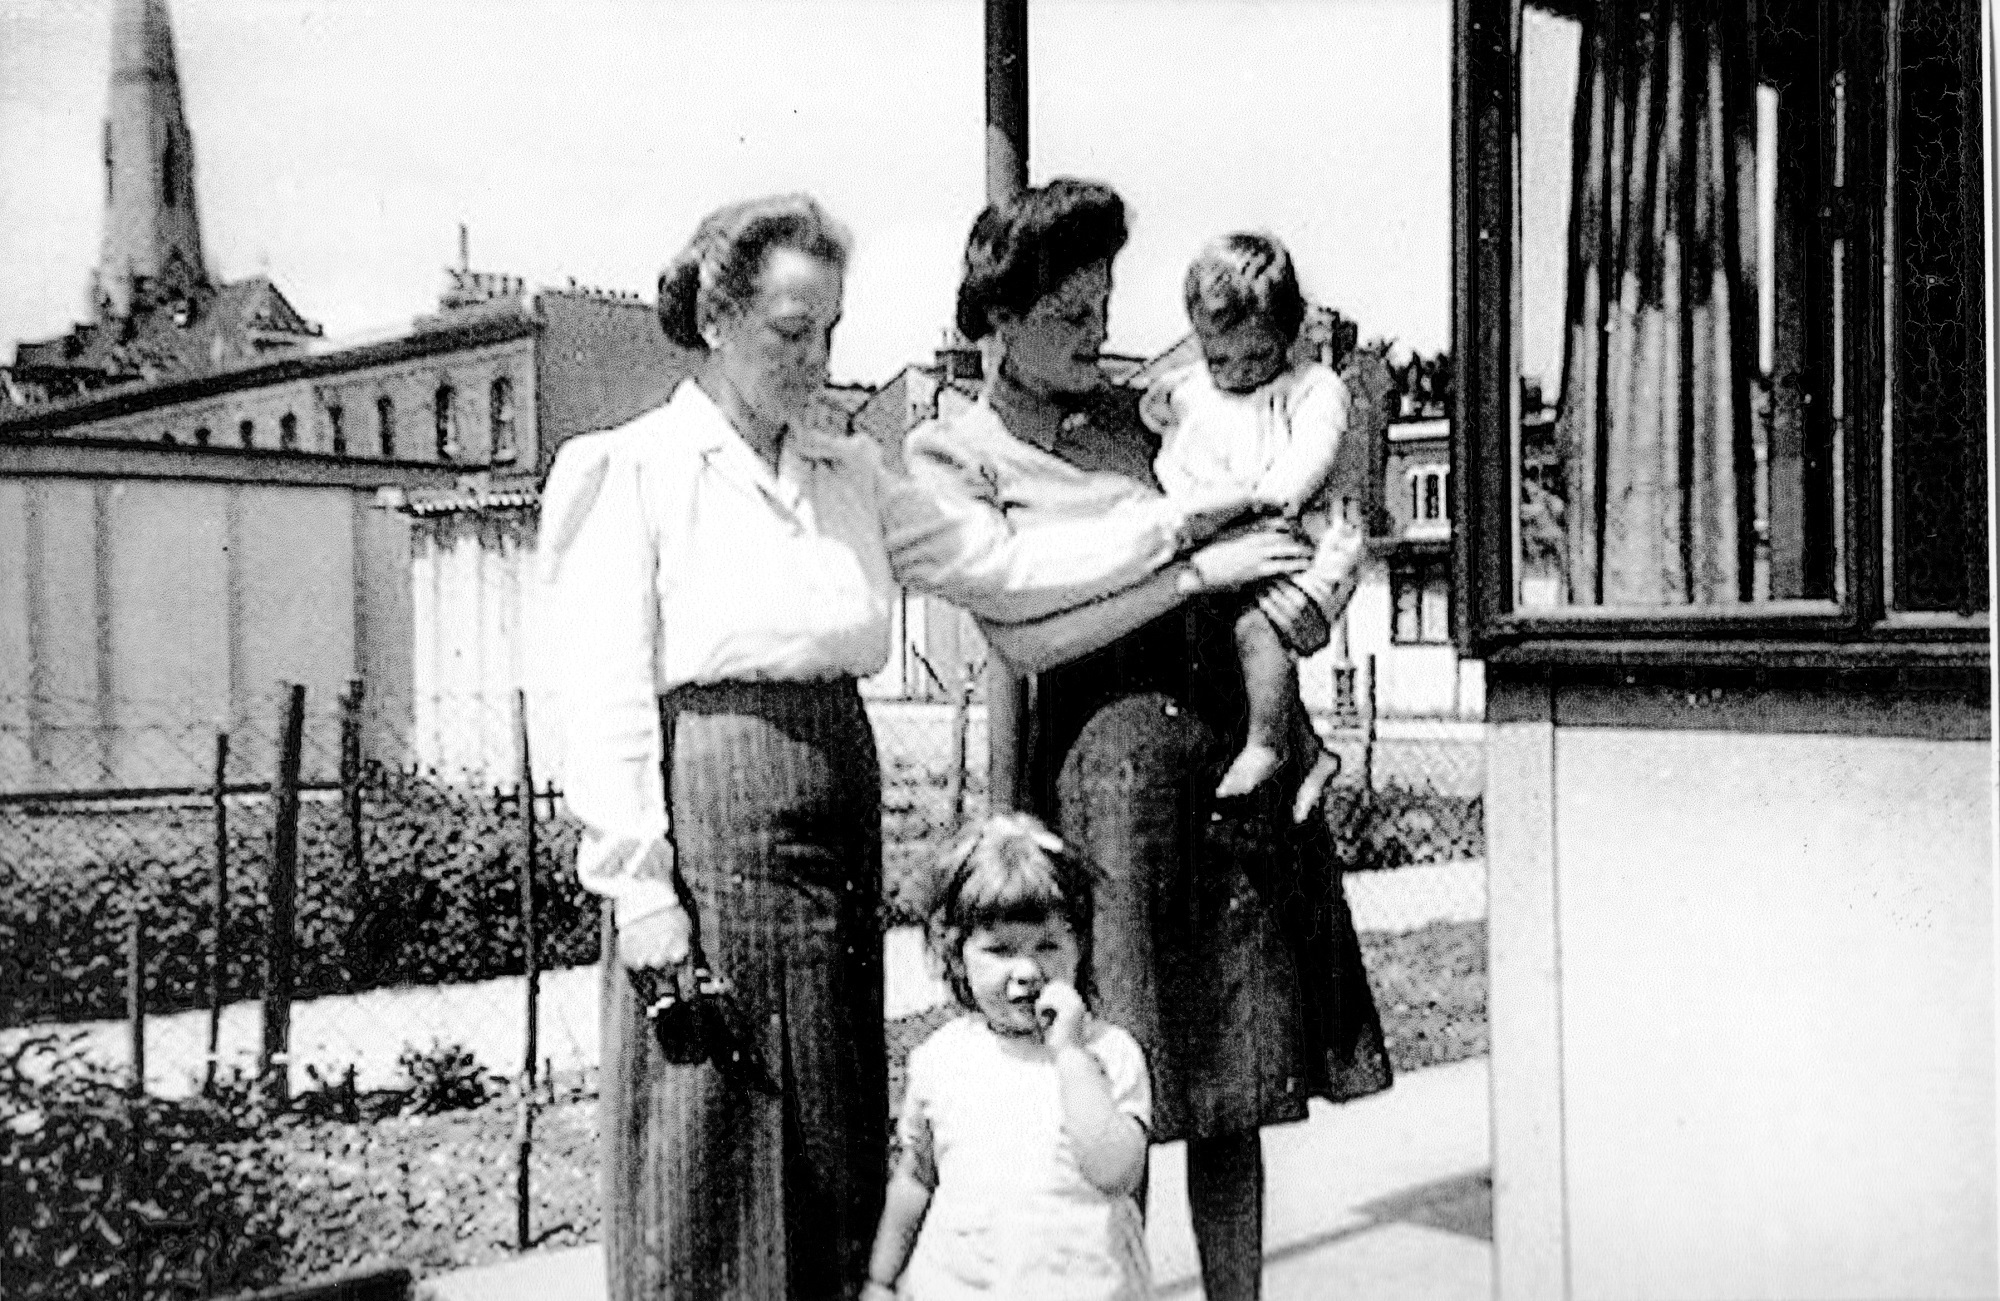 Mrs Rennie with her sister and baby. St Lawrence Road, Brixton